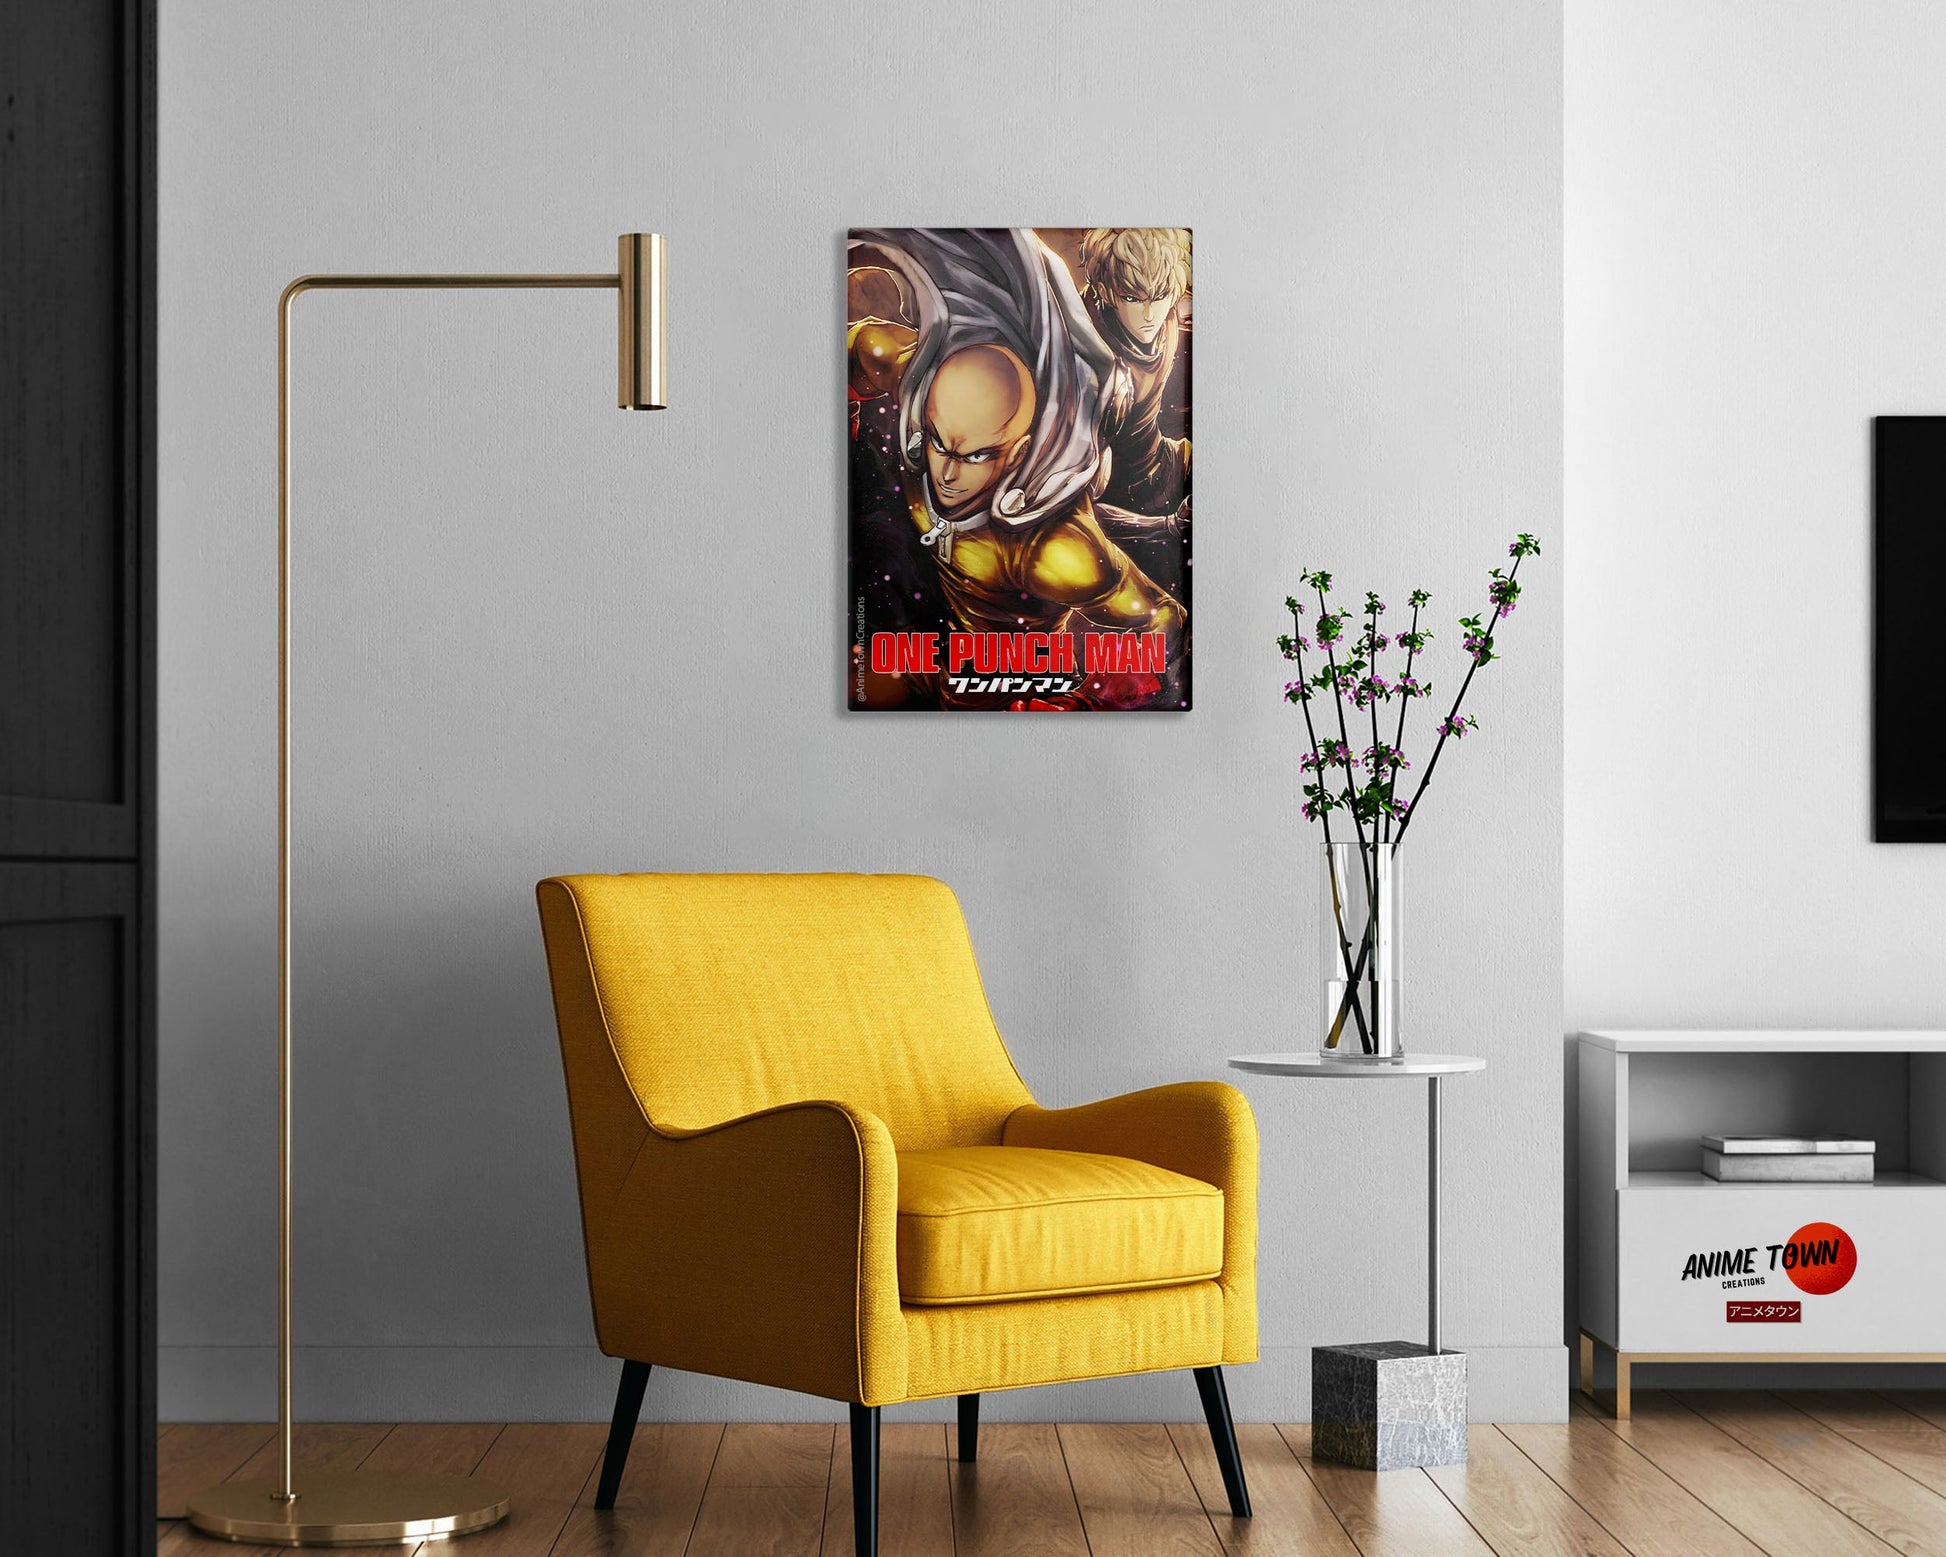 Anime Town Creations Metal Poster One Punch Man 24" x 36" Home Goods - Anime One Punch Man Metal Poster